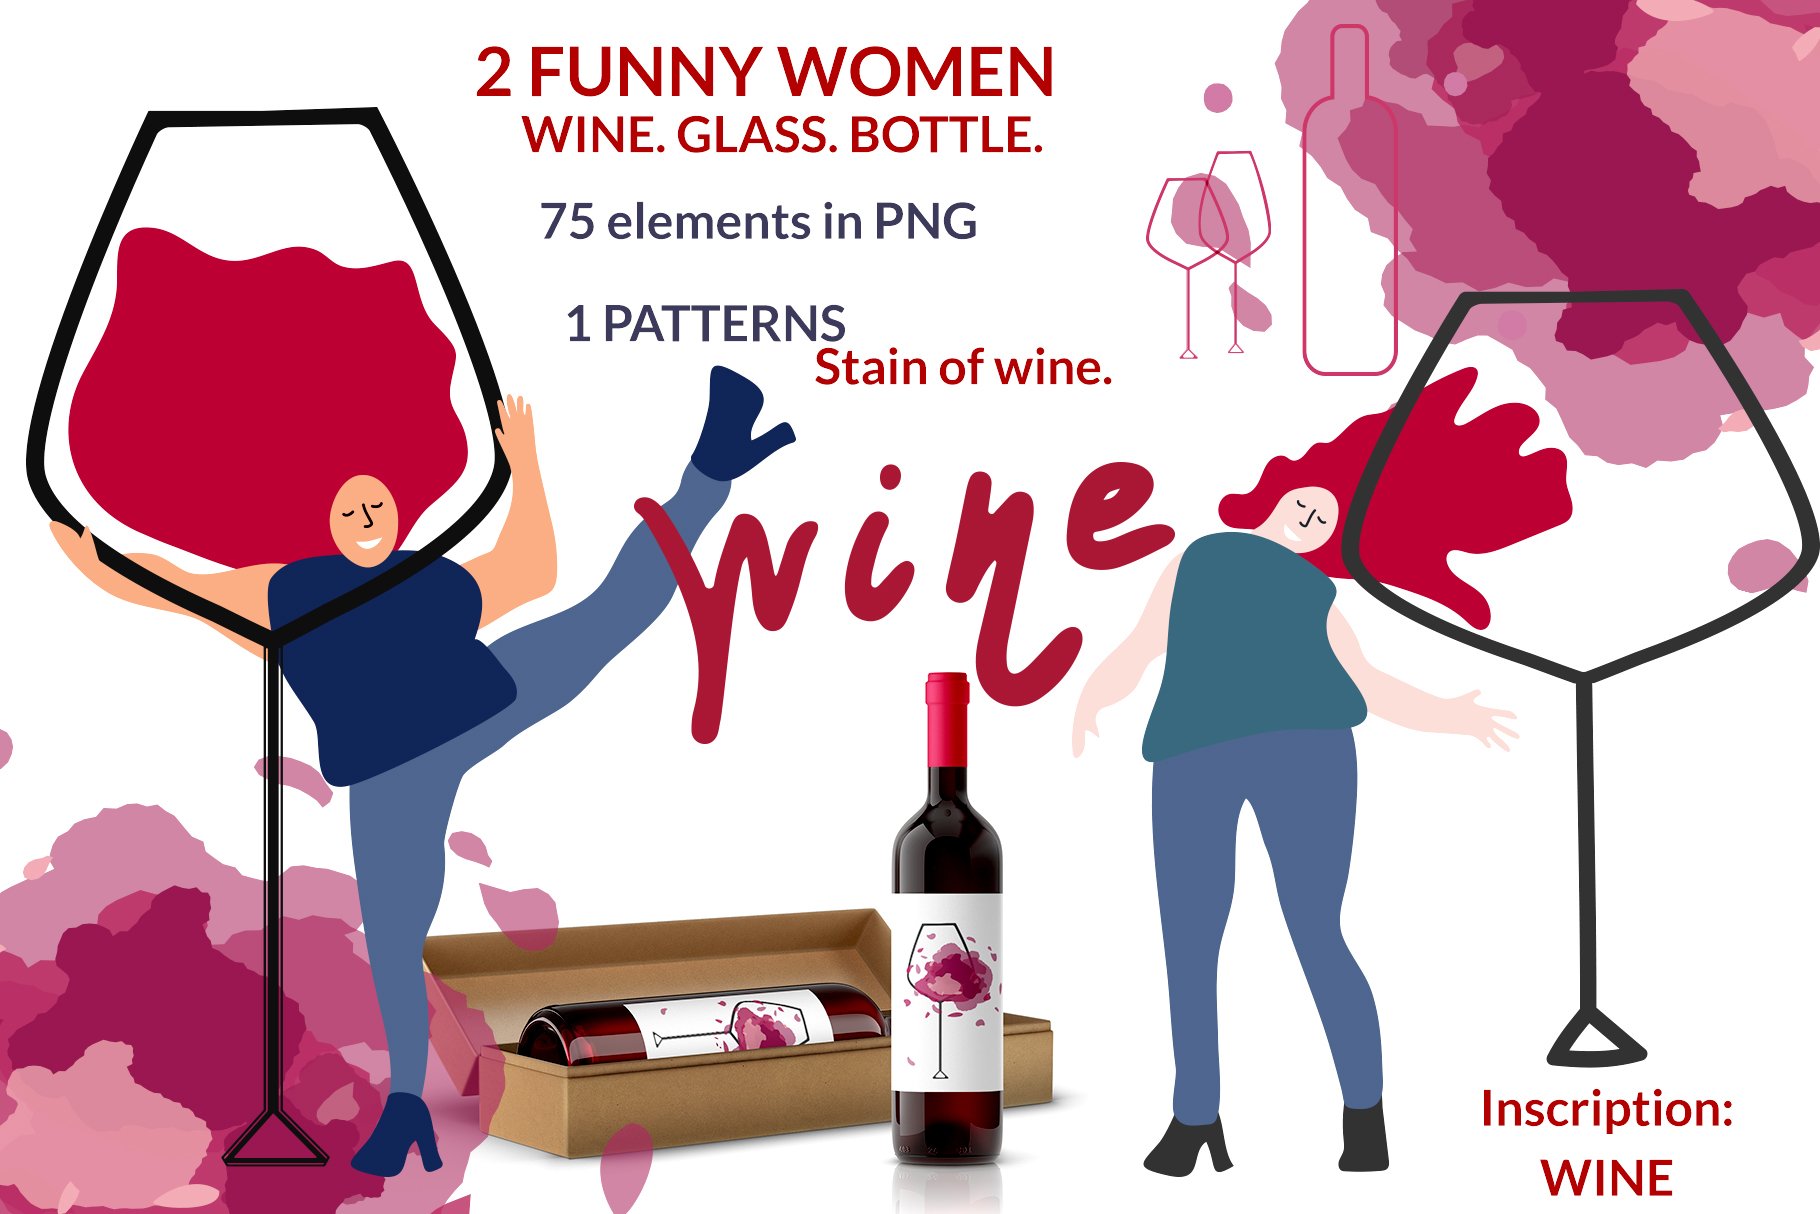 Label for RED WINE cover image.